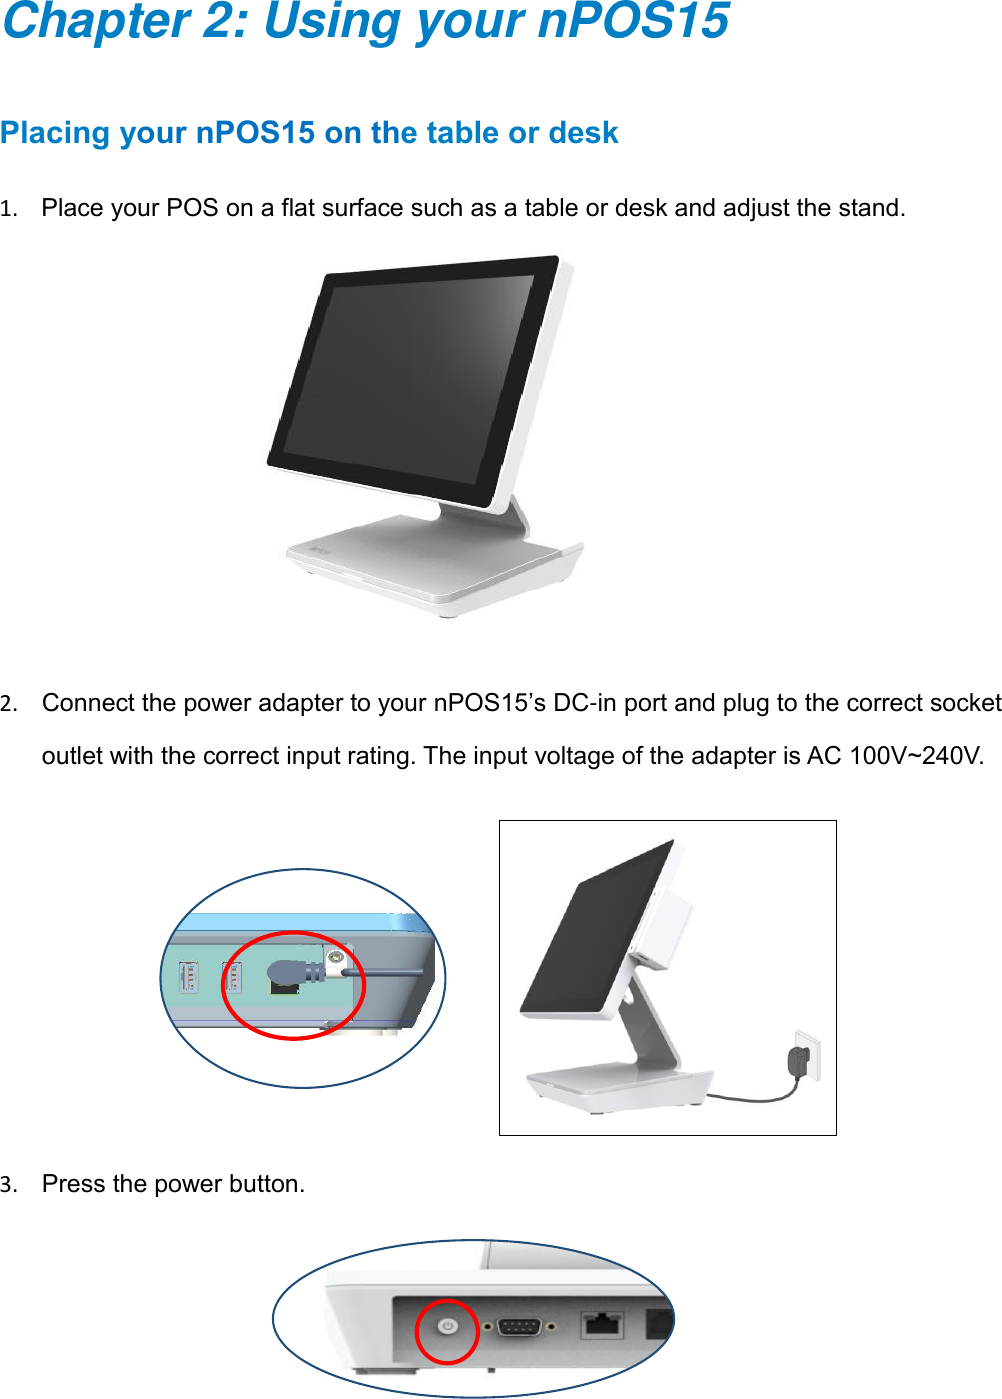 7      Chapter 2: Using your nPOS15 Placing your nPOS15 on the table or desk 1. Place your POS on a flat surface such as a table or desk and adjust the stand.     2. Connect the power adapter to your nPOS15’s DC-in port and plug to the correct socket outlet with the correct input rating. The input voltage of the adapter is AC 100V~240V.             3. Press the power button.   